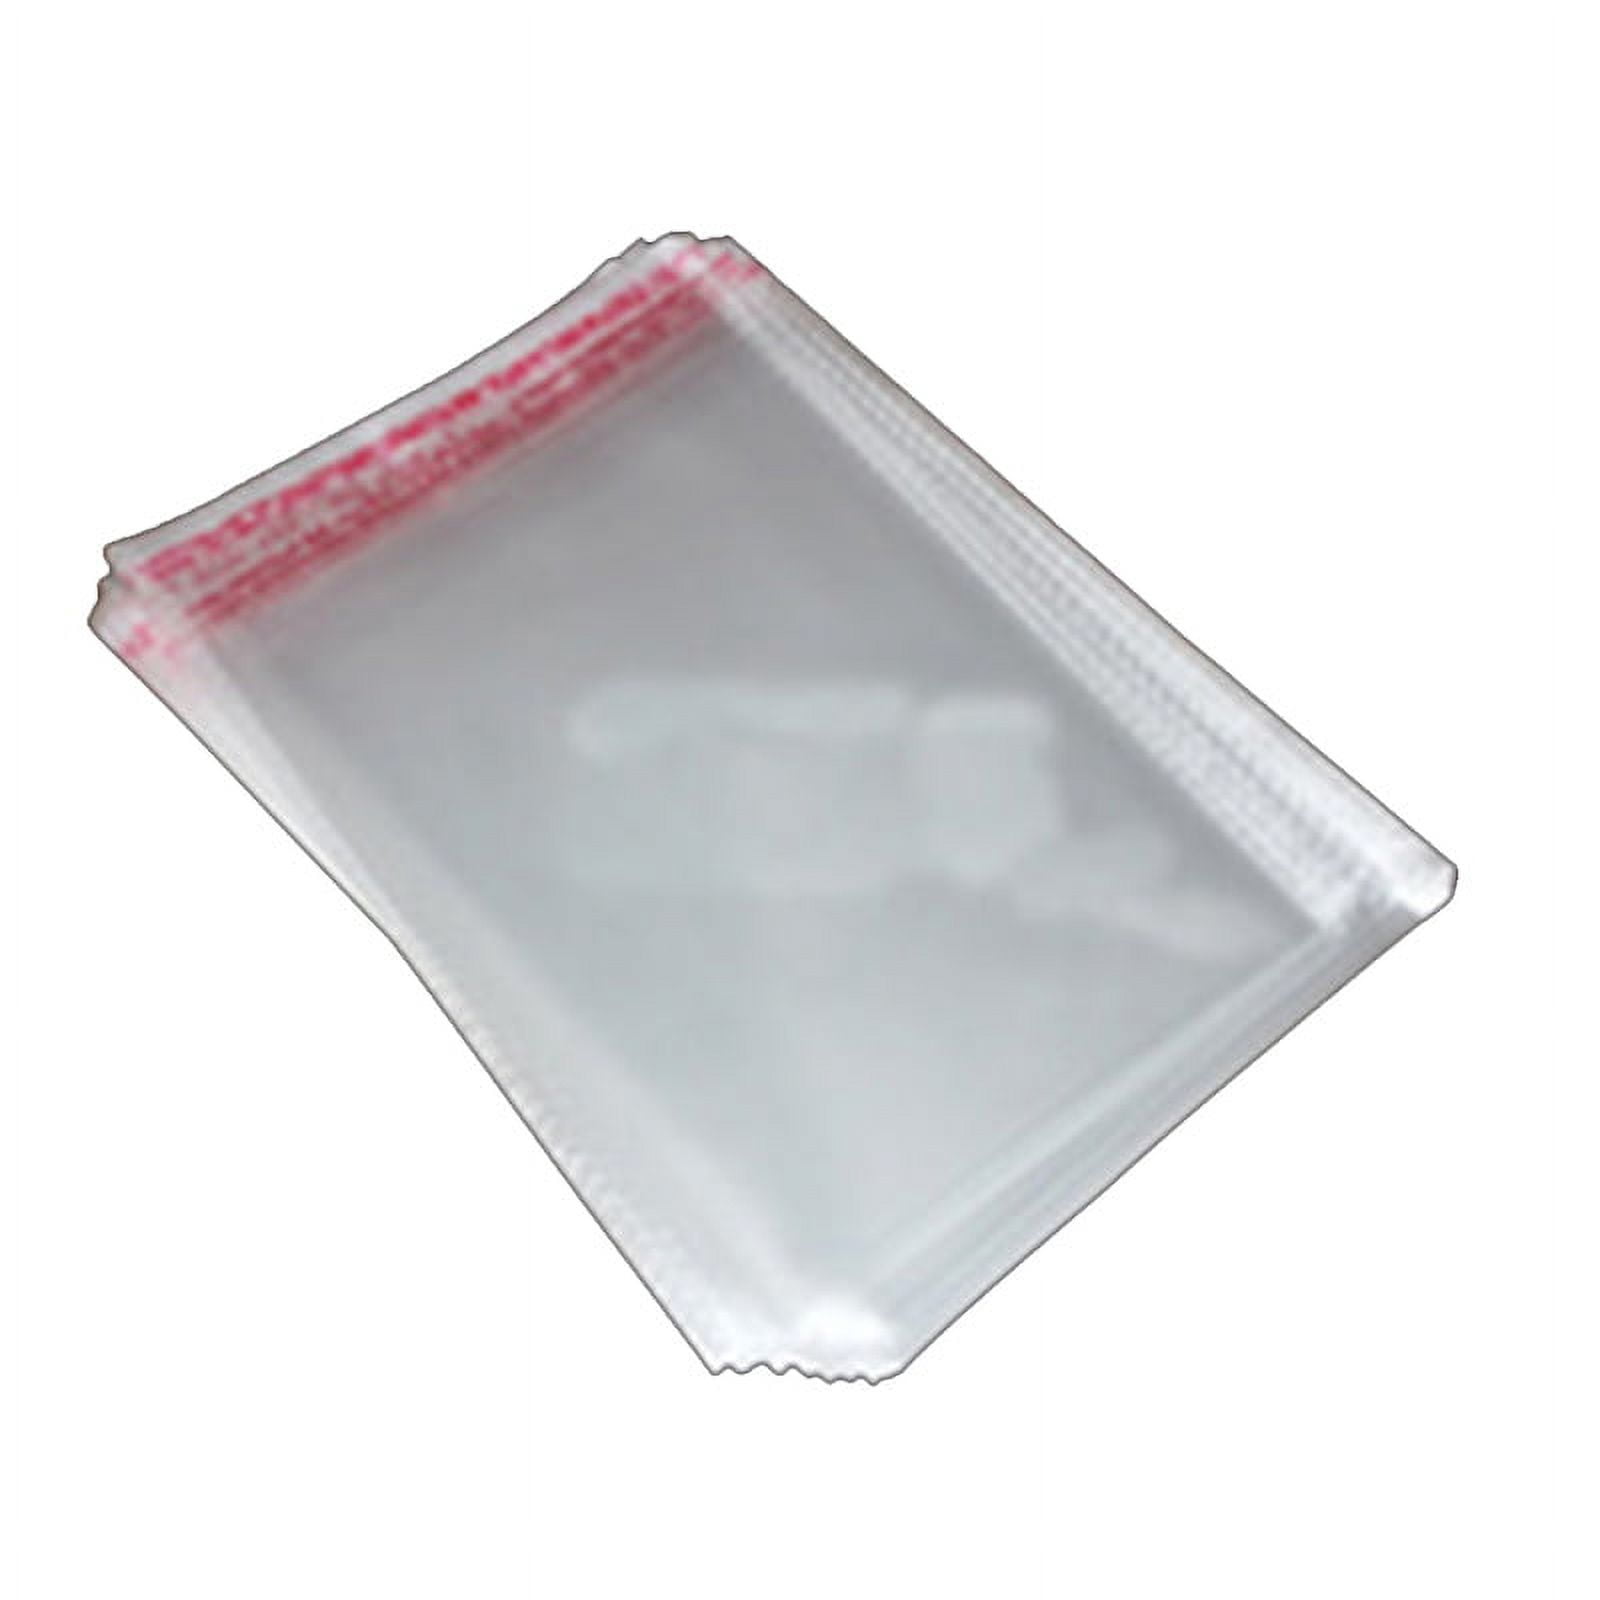 200 Pcs Clear Resealable Polypropylene Bags Self Seal Magazine Protectors  for Collectors Clear Plastic Bags for Magazine Prints Photos Documents (11  x